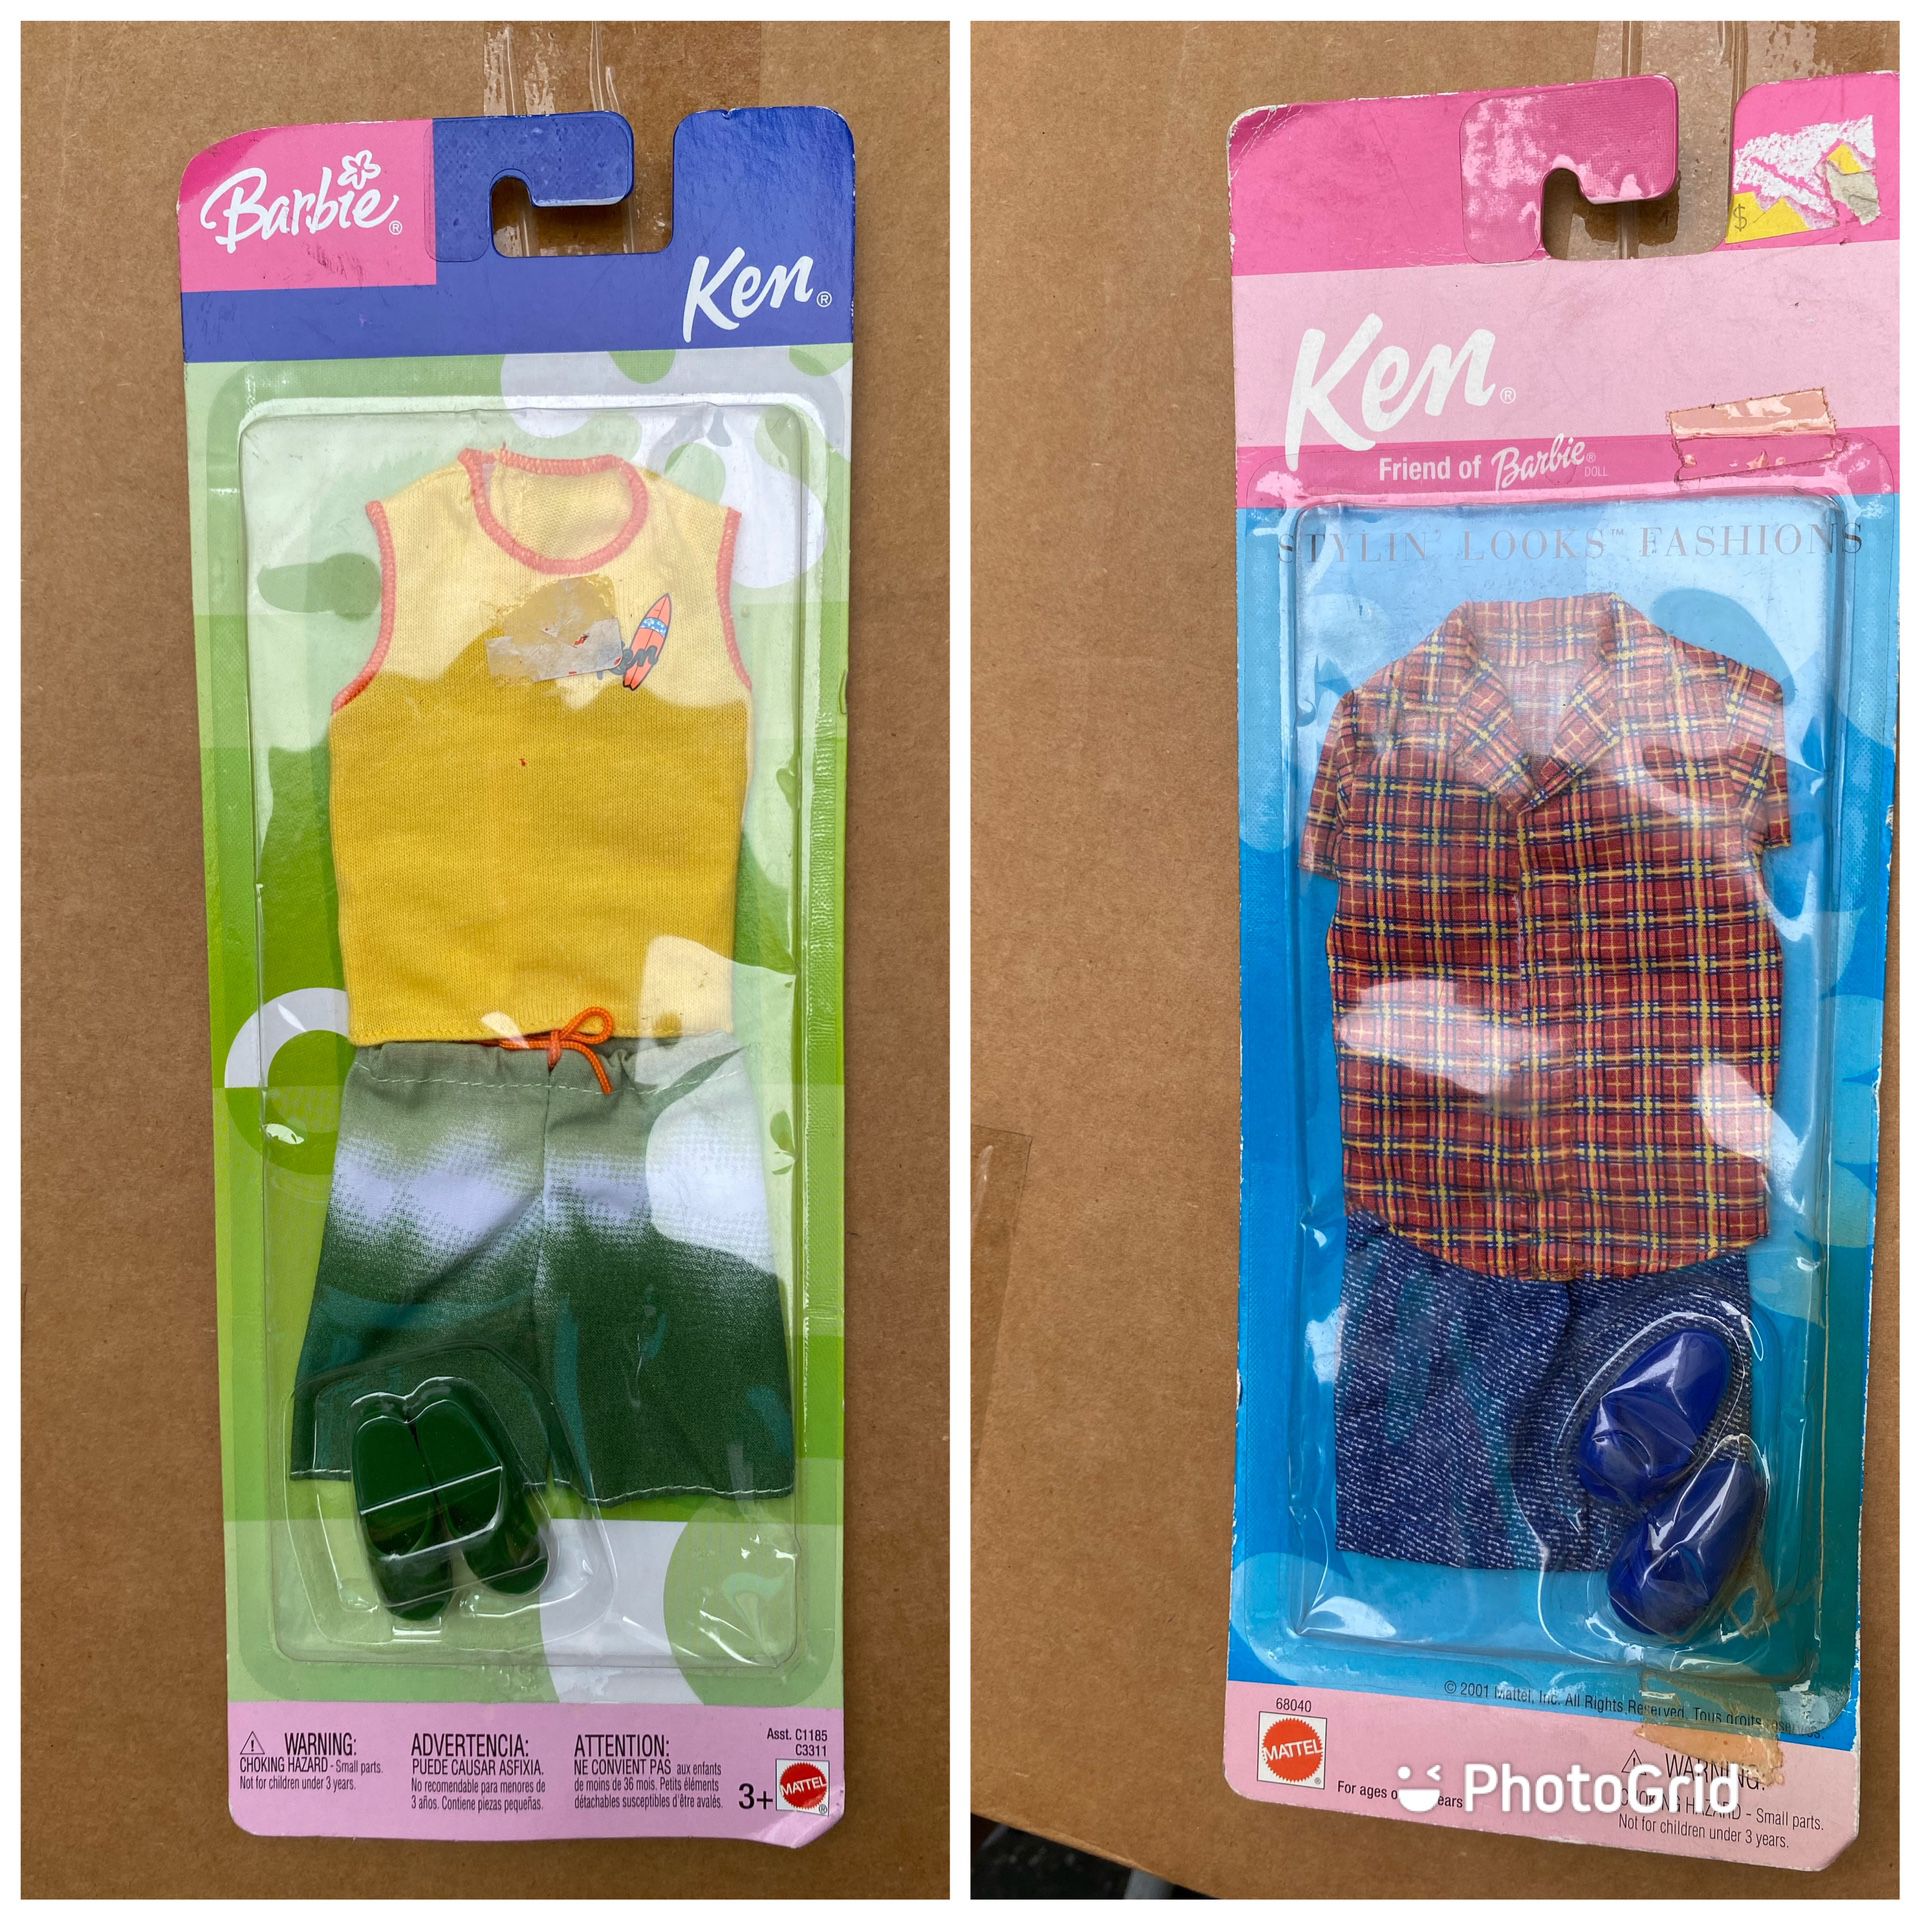 New Barbie Ken Stylin Looks Fashion 2001 or Surfer outfit 2003 each $14